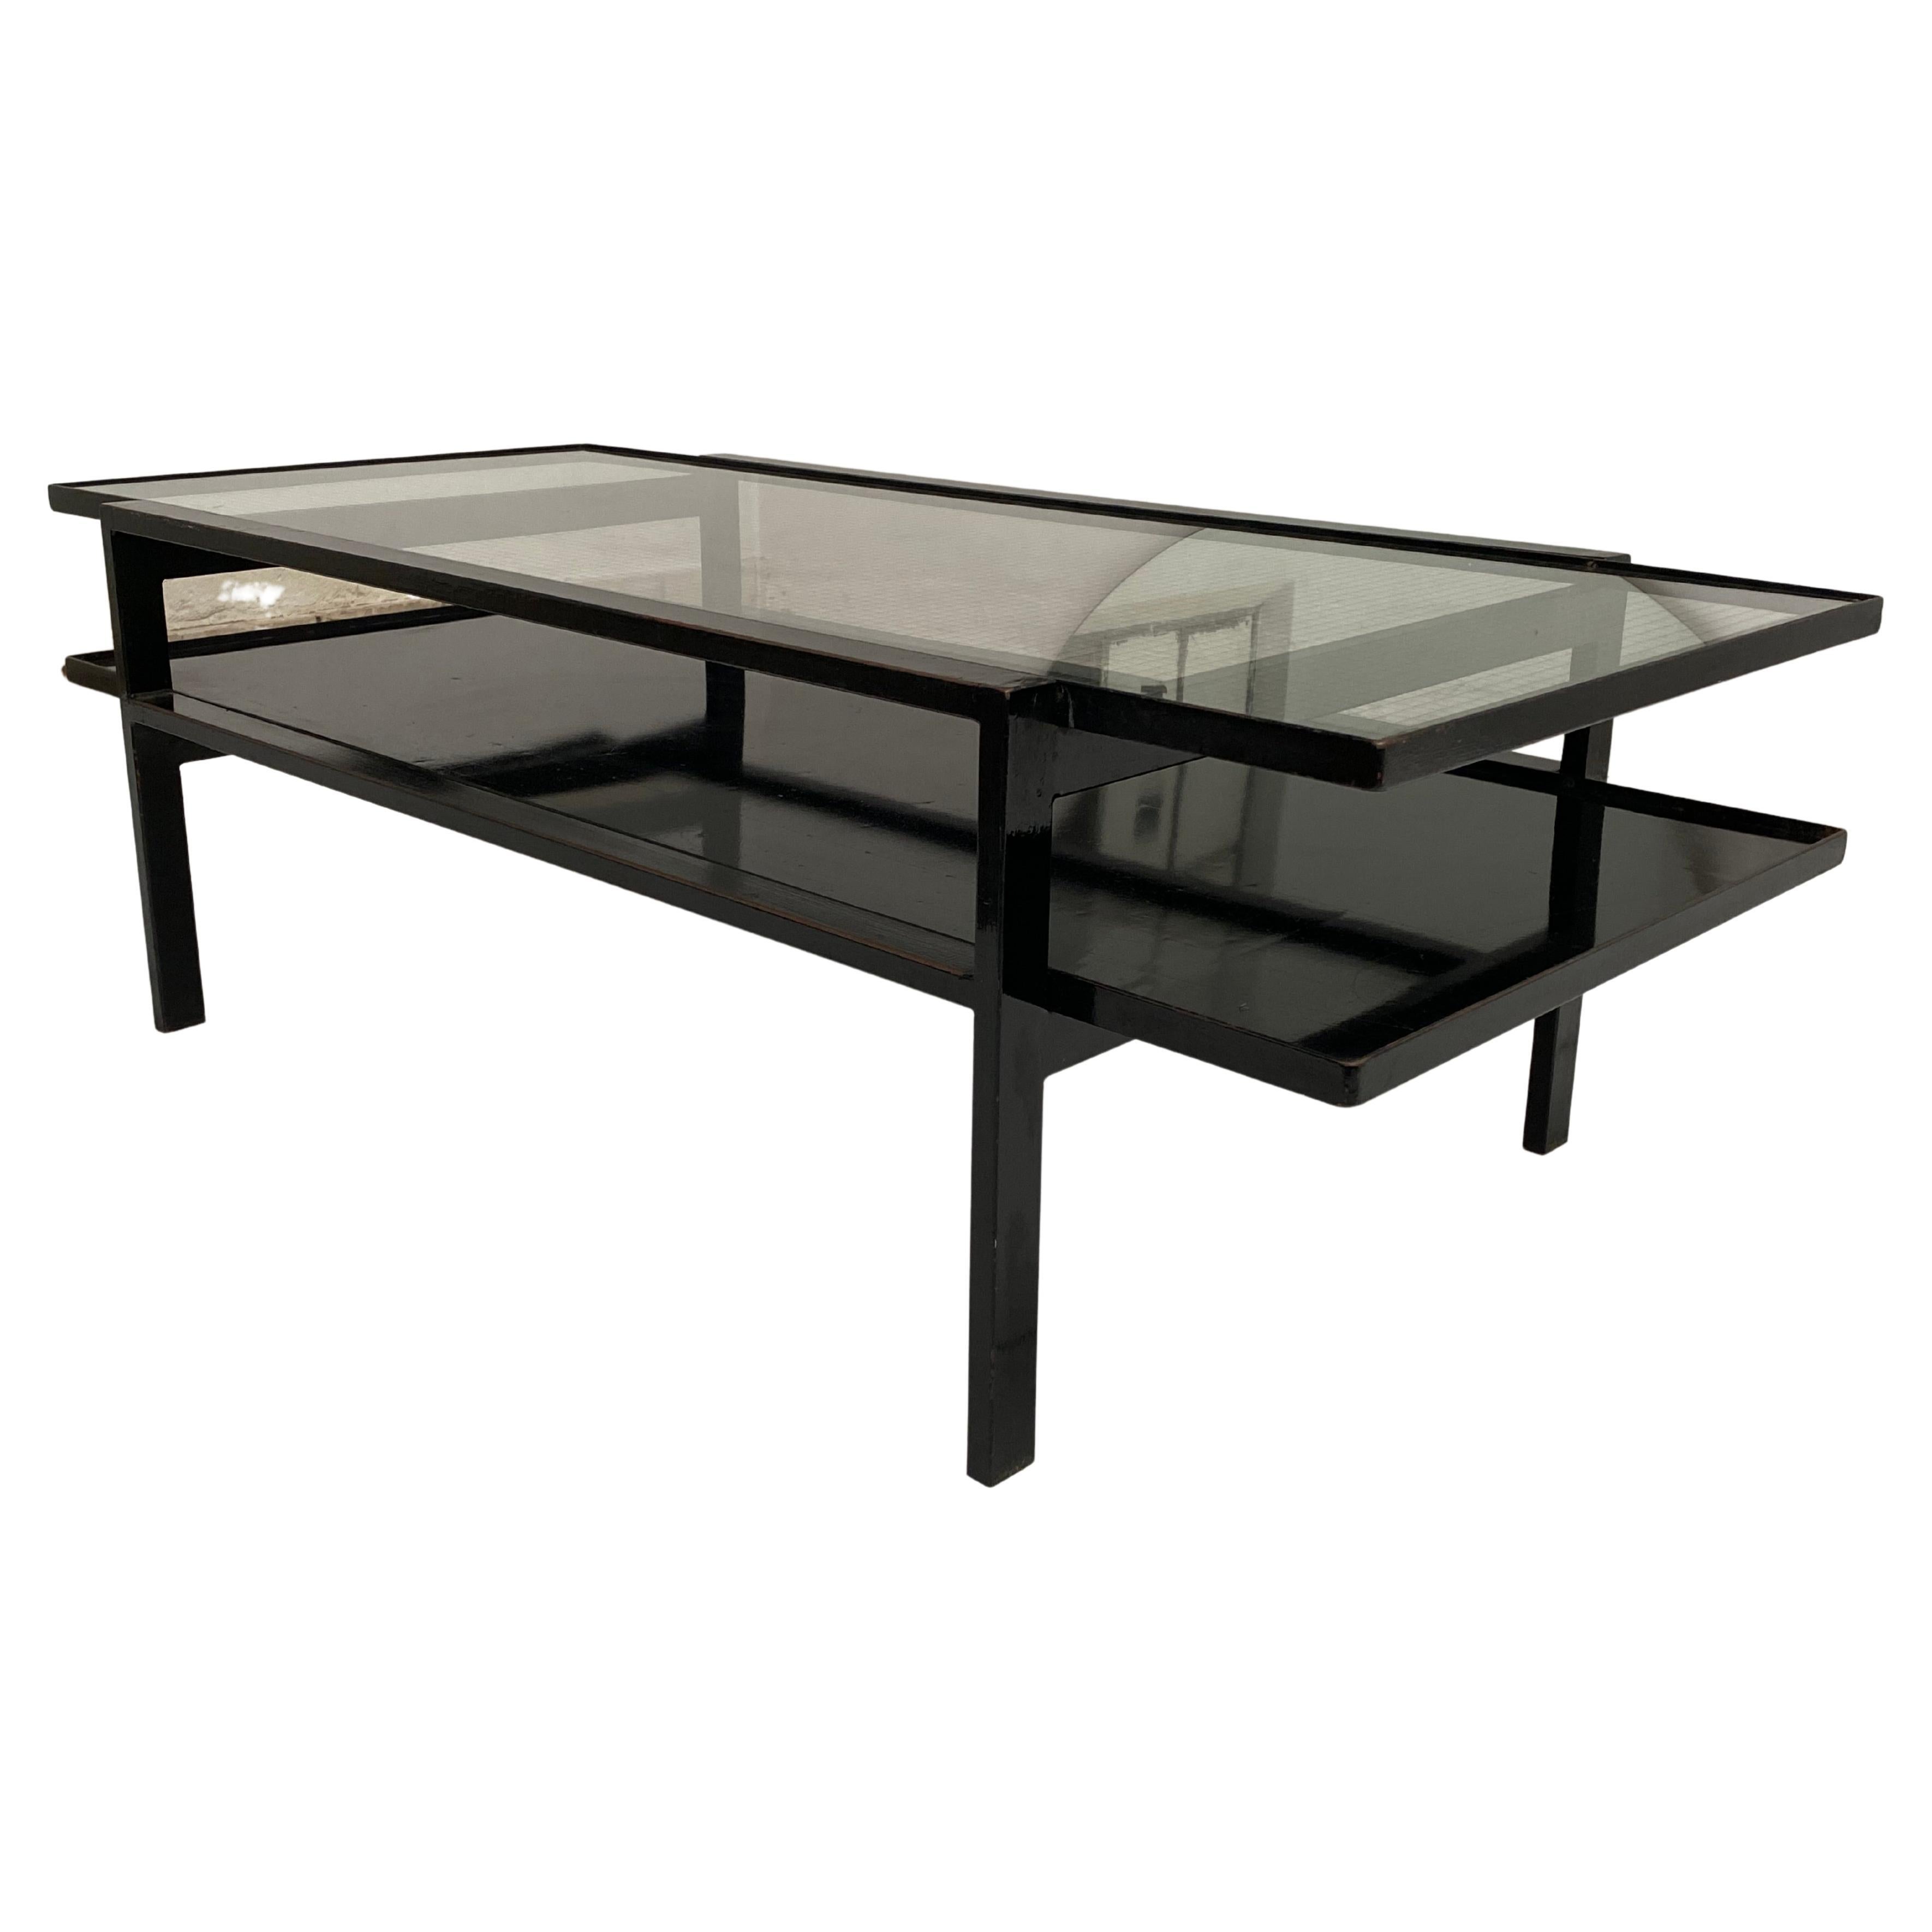 1950s Modernist 2 Tier Coffee table that came from an architects house in The Netherlands

A piece unique that was custom made by the previous owner

Heavy black enamelled steel frame with a zinc plate and steel wired safety glass top

Nice